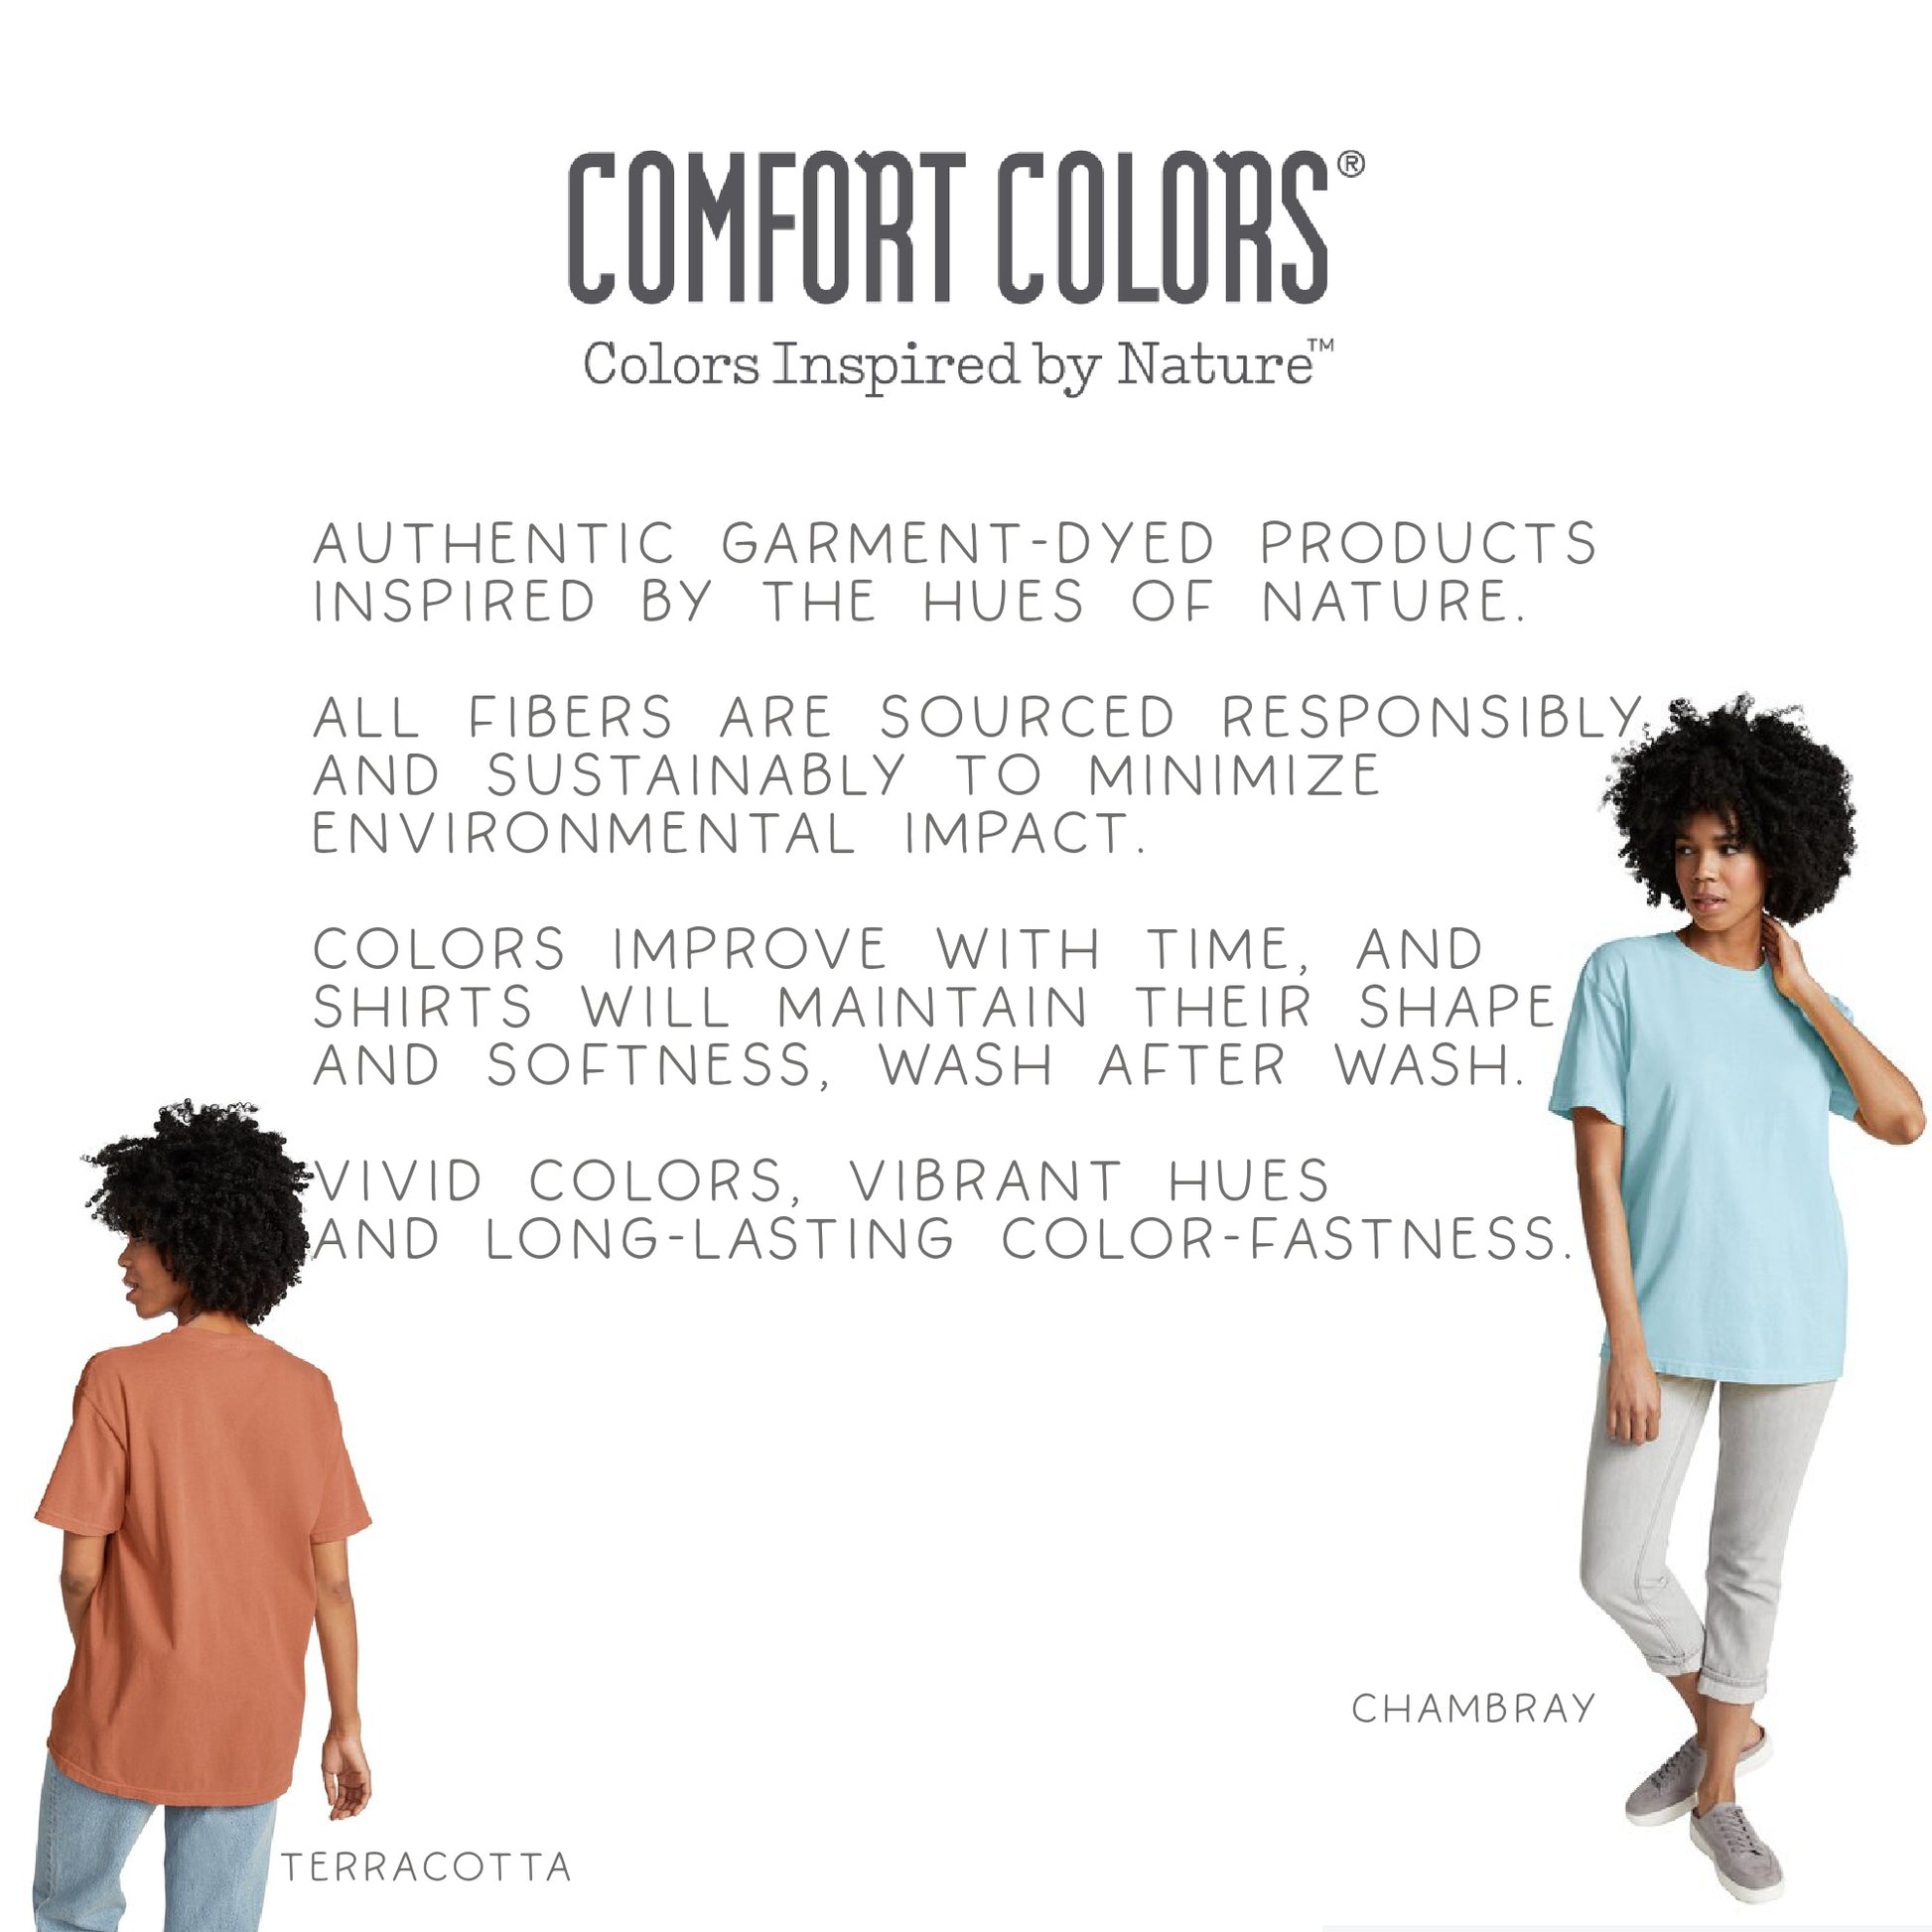 Comfort Colors on Instagram: It's giving us Summer vibrant, feel-good  vibes ☀️🌈. #SpreadGoodVibes #ComfortColors #FeelGoodVibes #OddlySatisfying  #DopamineDressing #ScreenPrinting #ScreenPrints #SpringStyles  #ColorBlockOutfits #ComfortColors